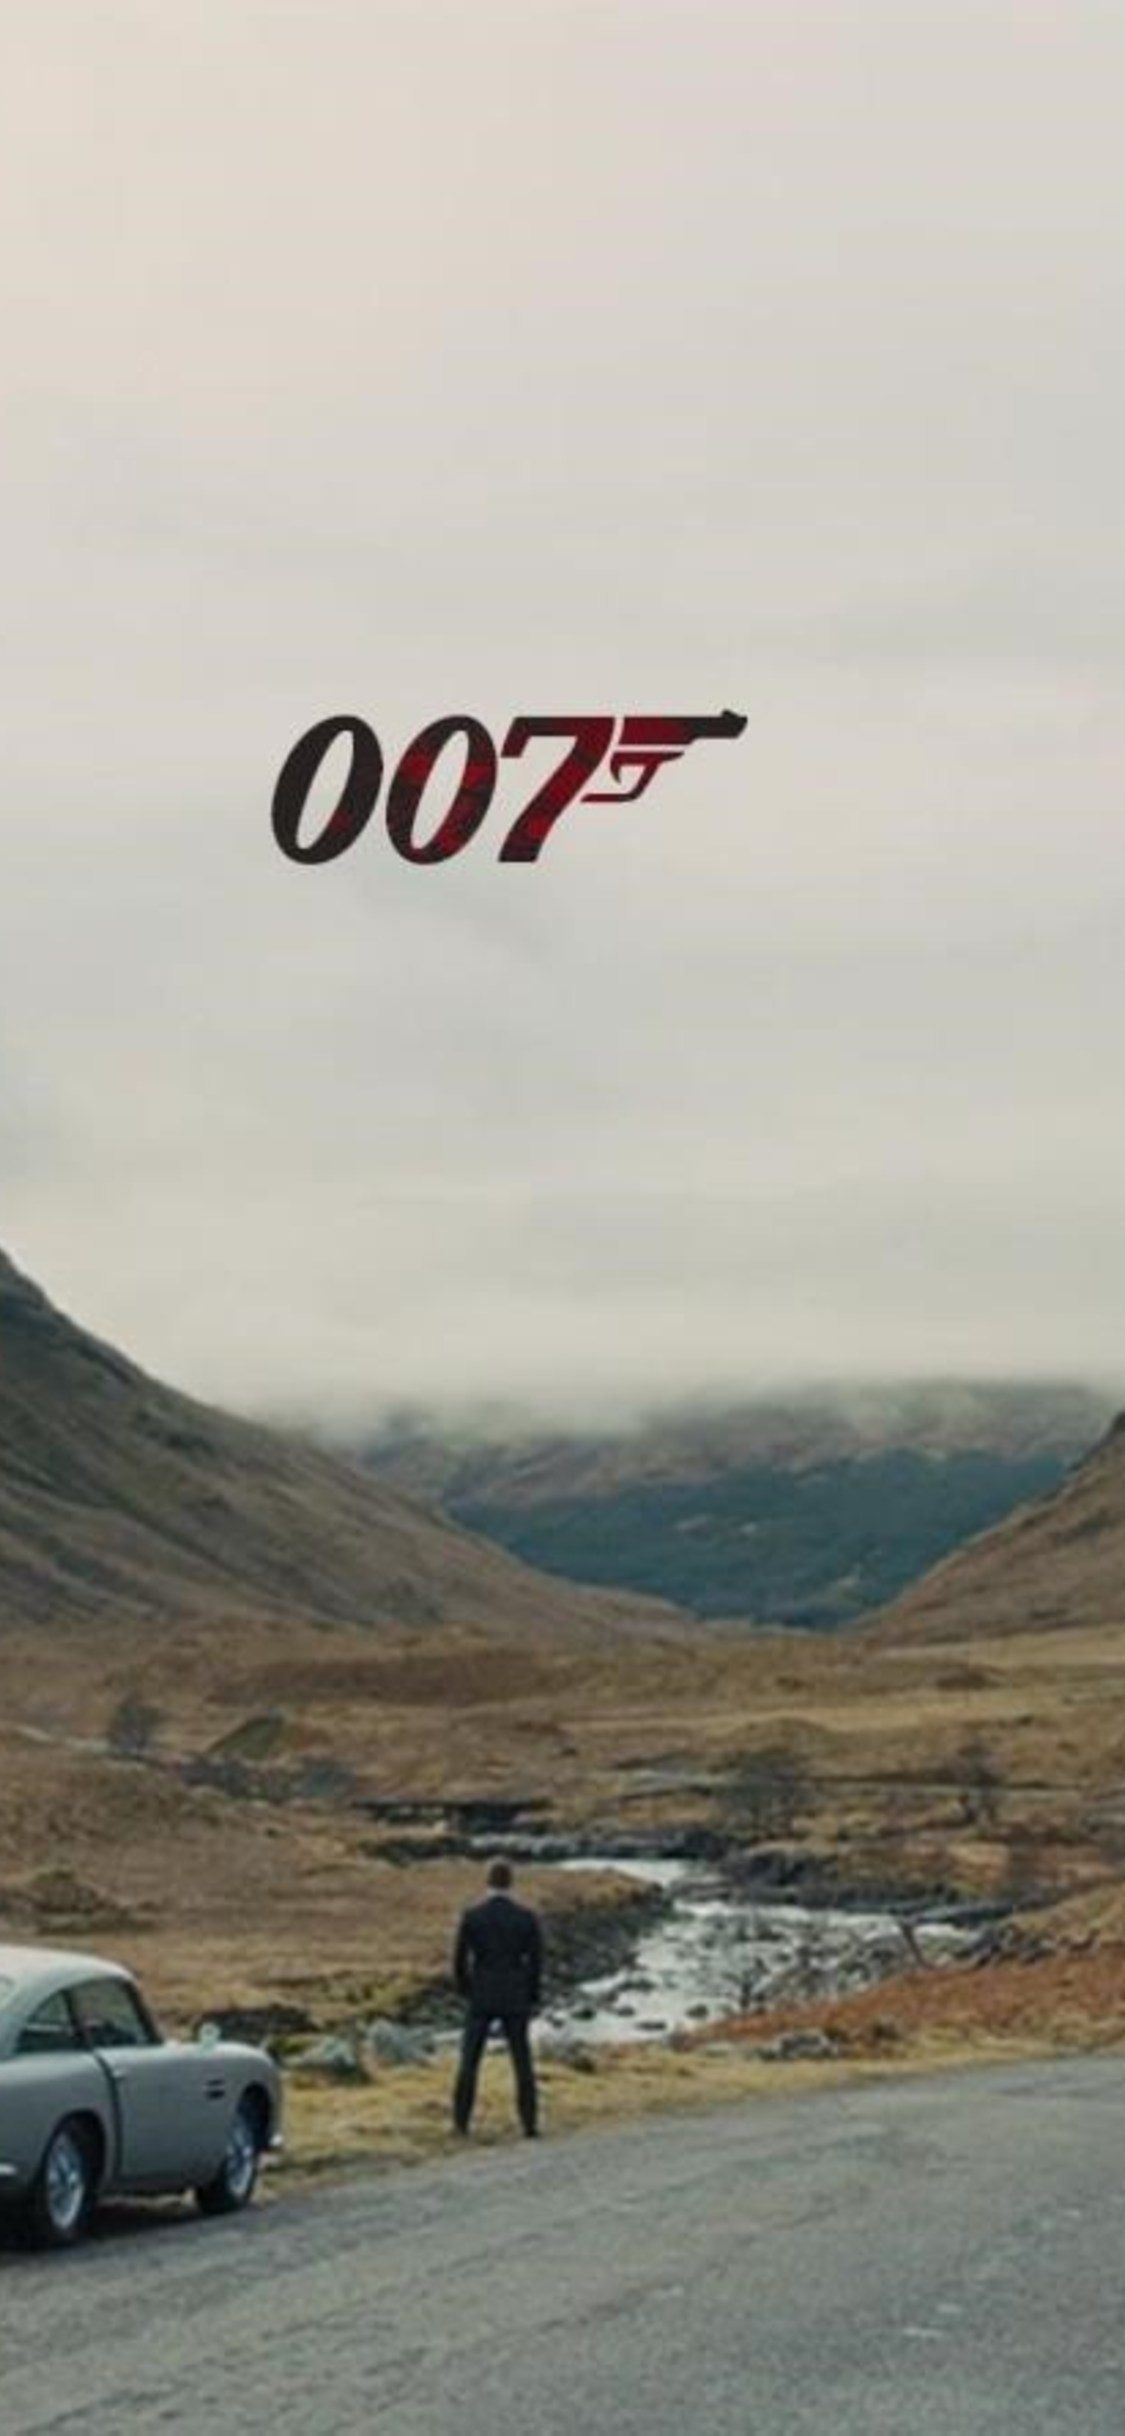 007 Wallpapers posted by Michelle Thompson